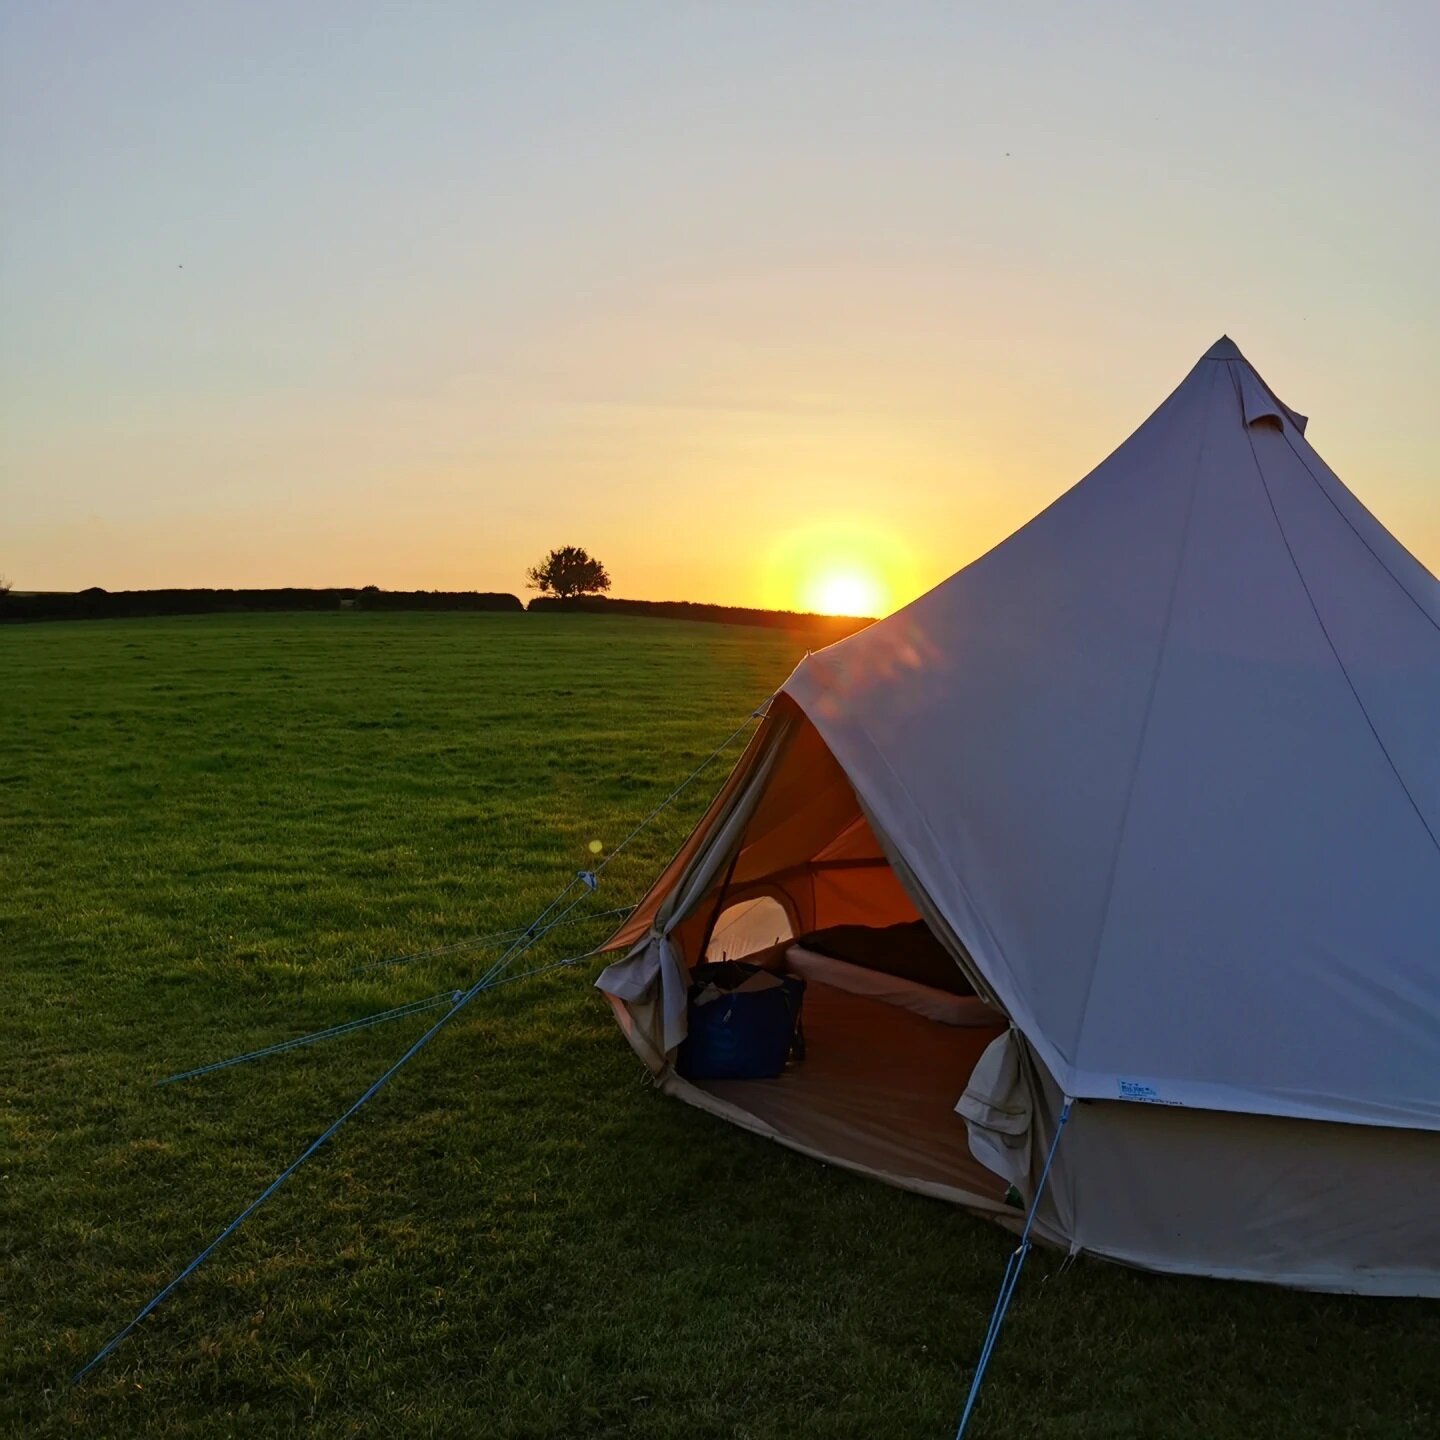 Only 11 days till we open the gates to all you lovely people, and last was my first ever time sleeping in a bell tent, what a treat. Thanks @dunwellfarm for the bed for the night.

Plenty of availability so get booking at www.loveshill.co.uk

#lovesh